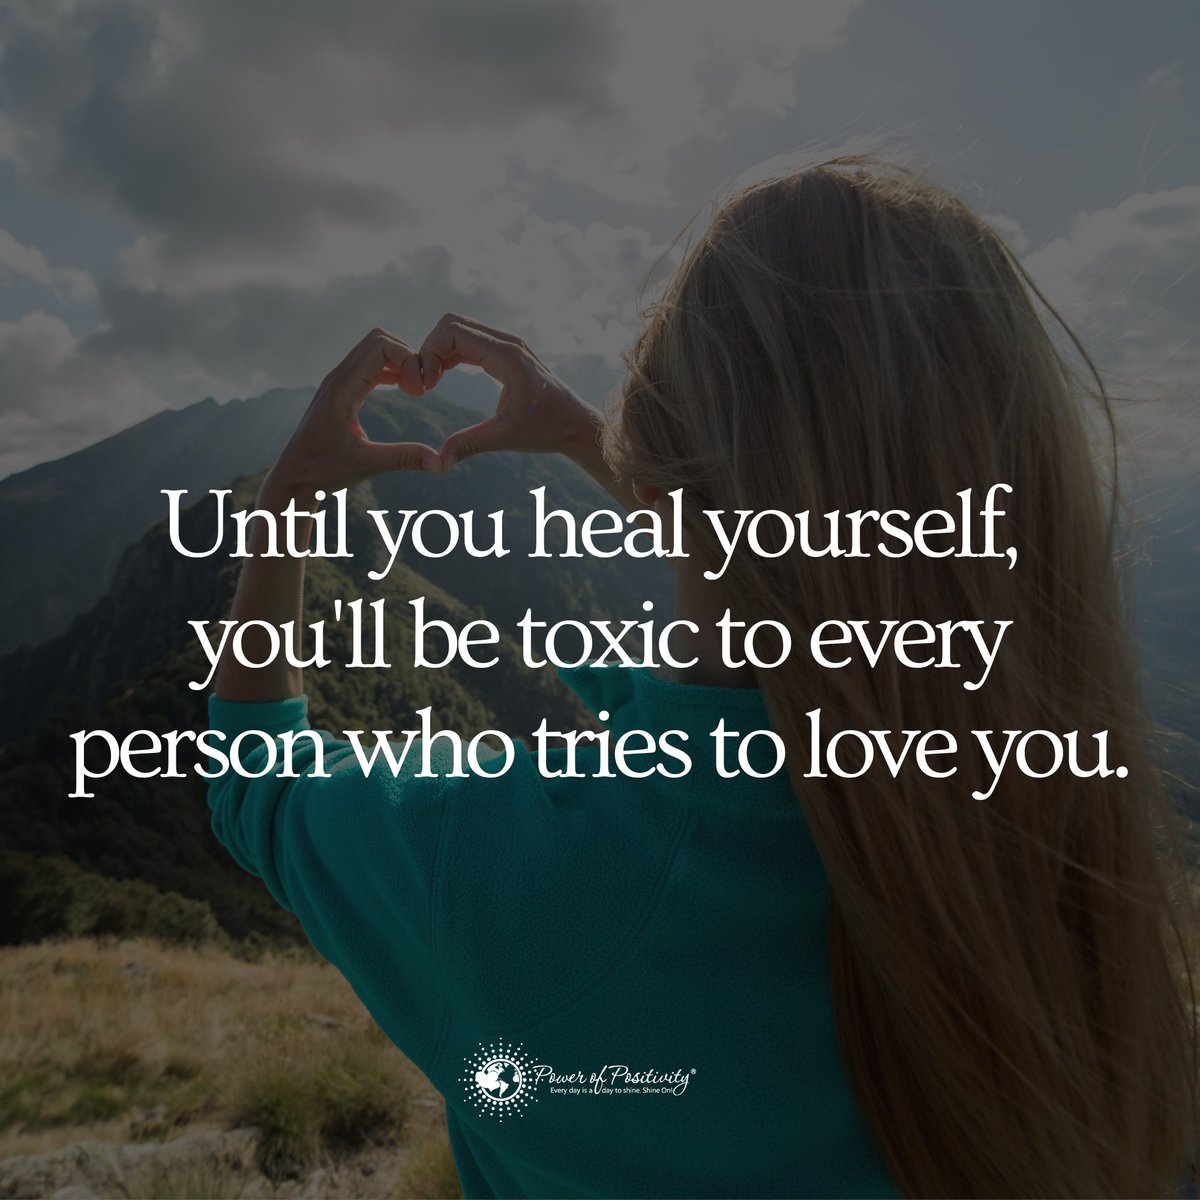 Until you heal yourself, you'll be toxic to every person who tries to love you.